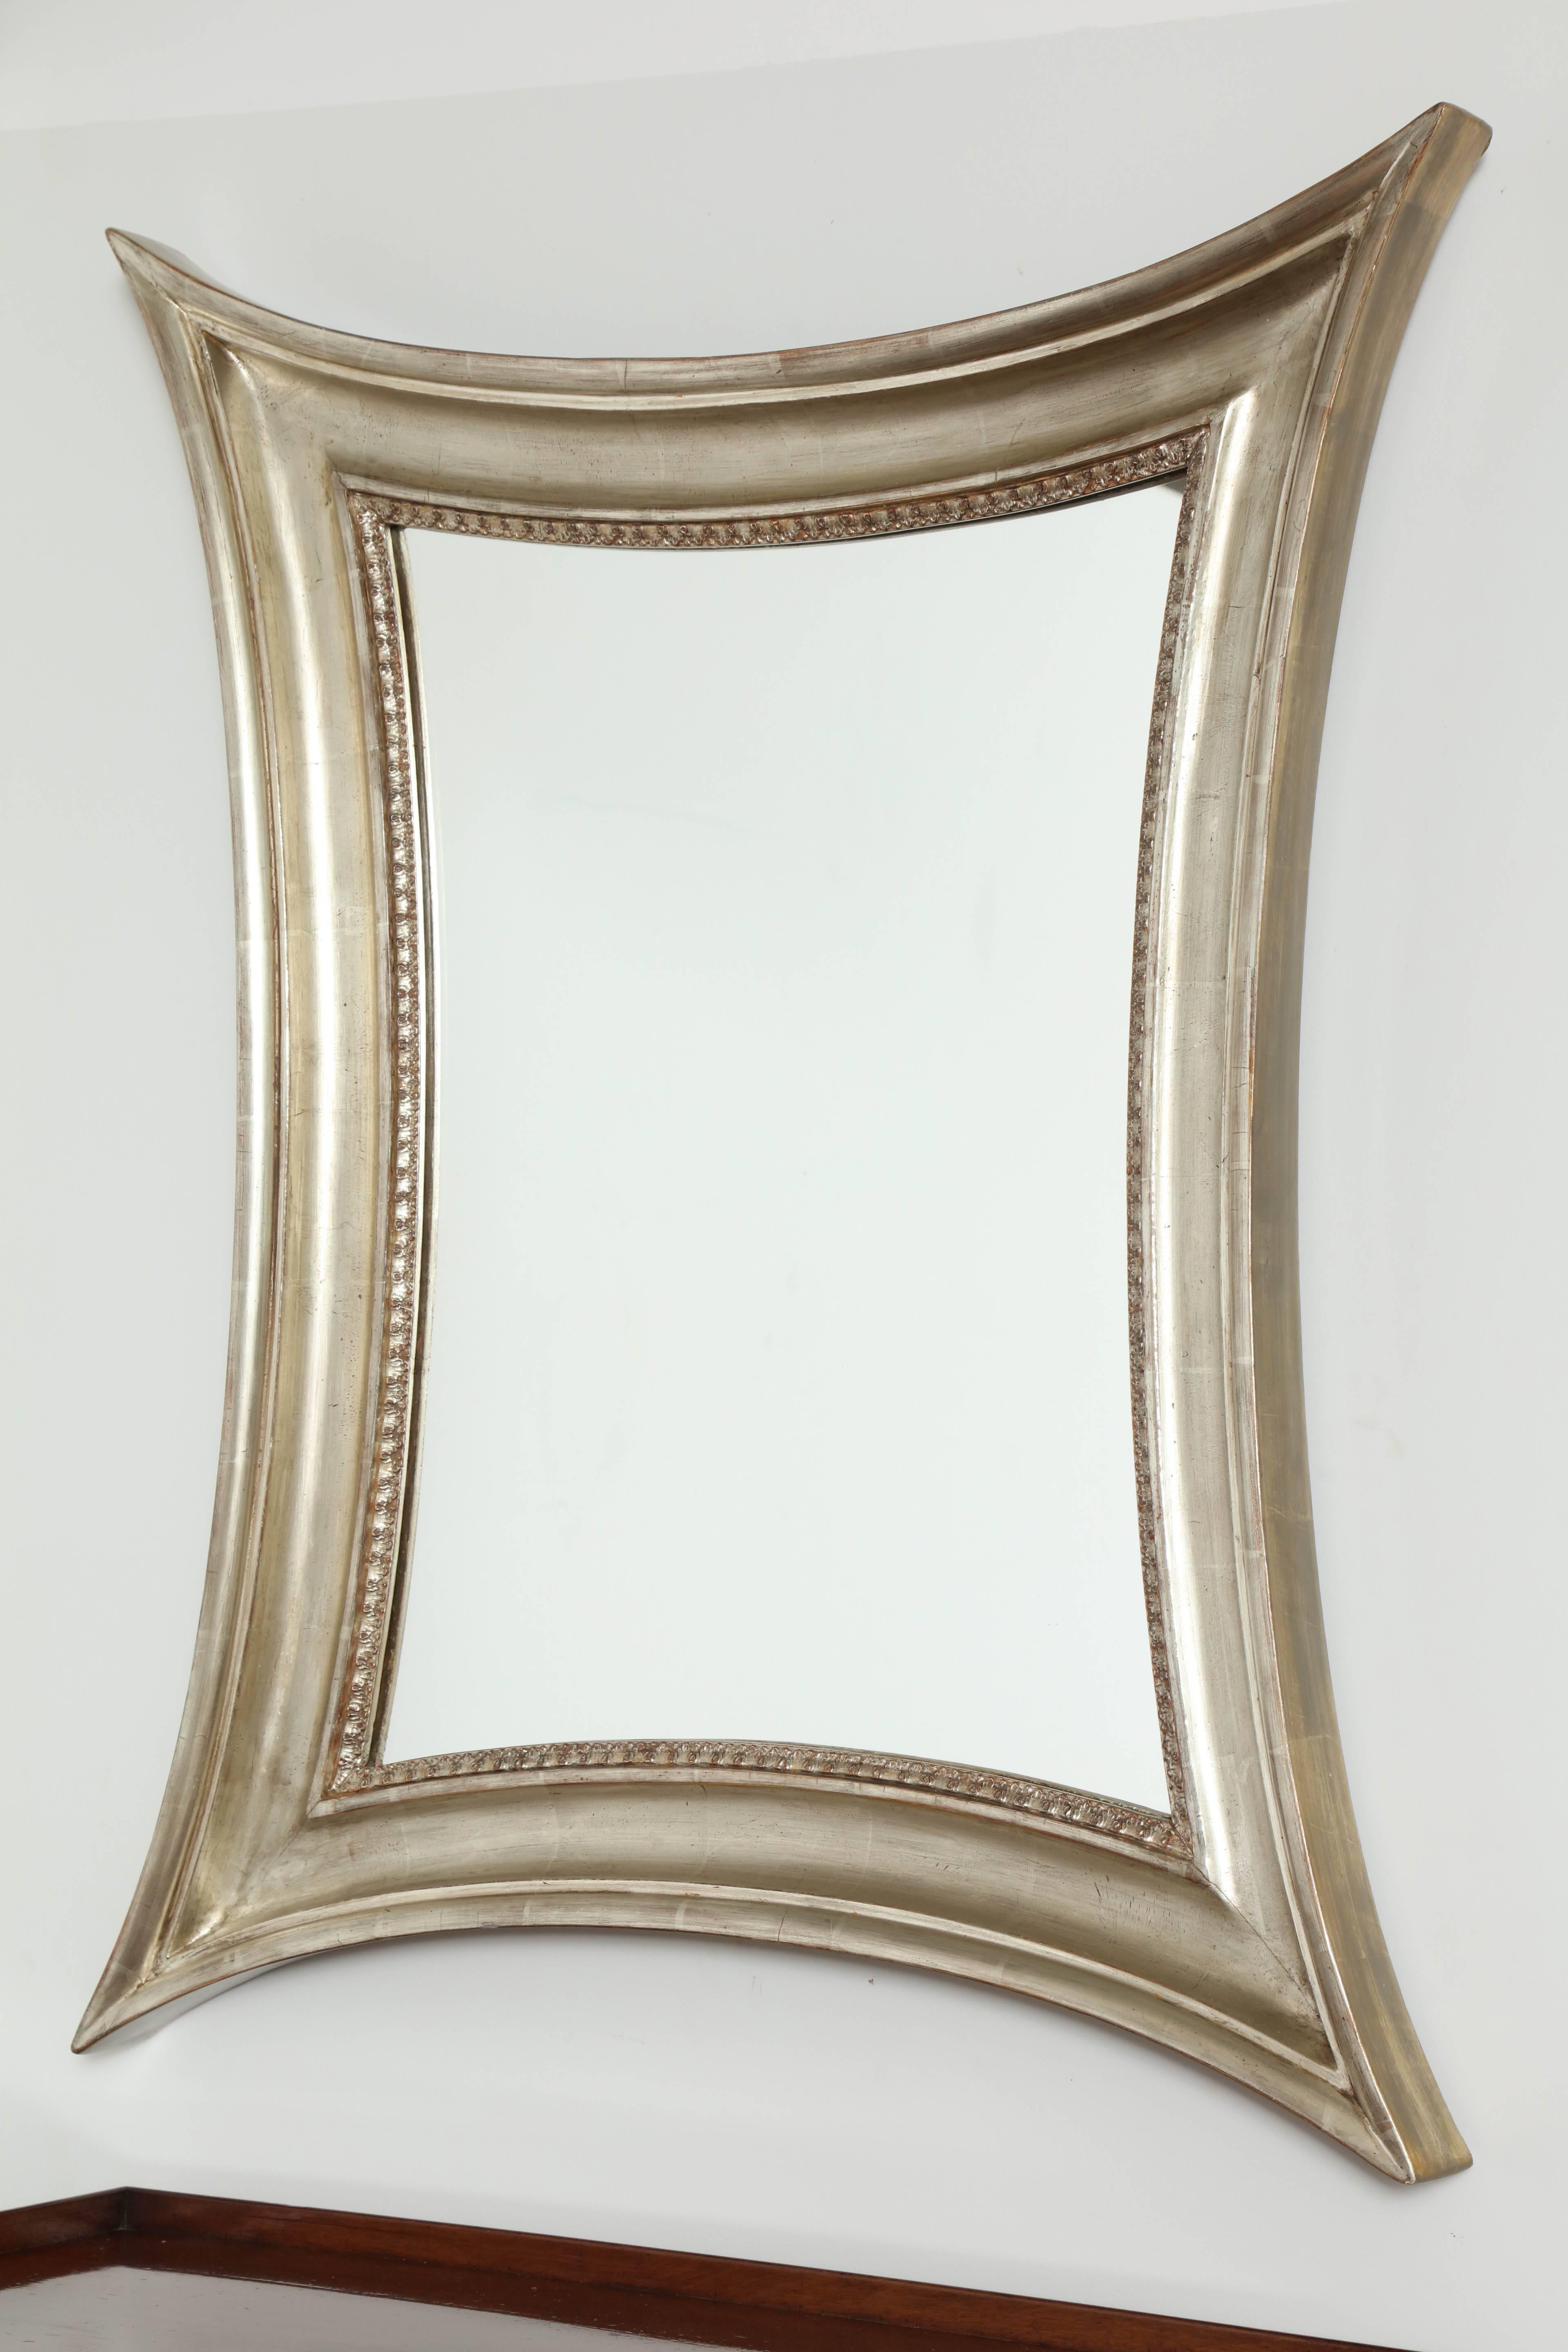 A Danish silver giltwood mirror, circa 1860s, with concave sides and a deep cove section frame and foliate cast inner edge. Mirror replaced but not new.